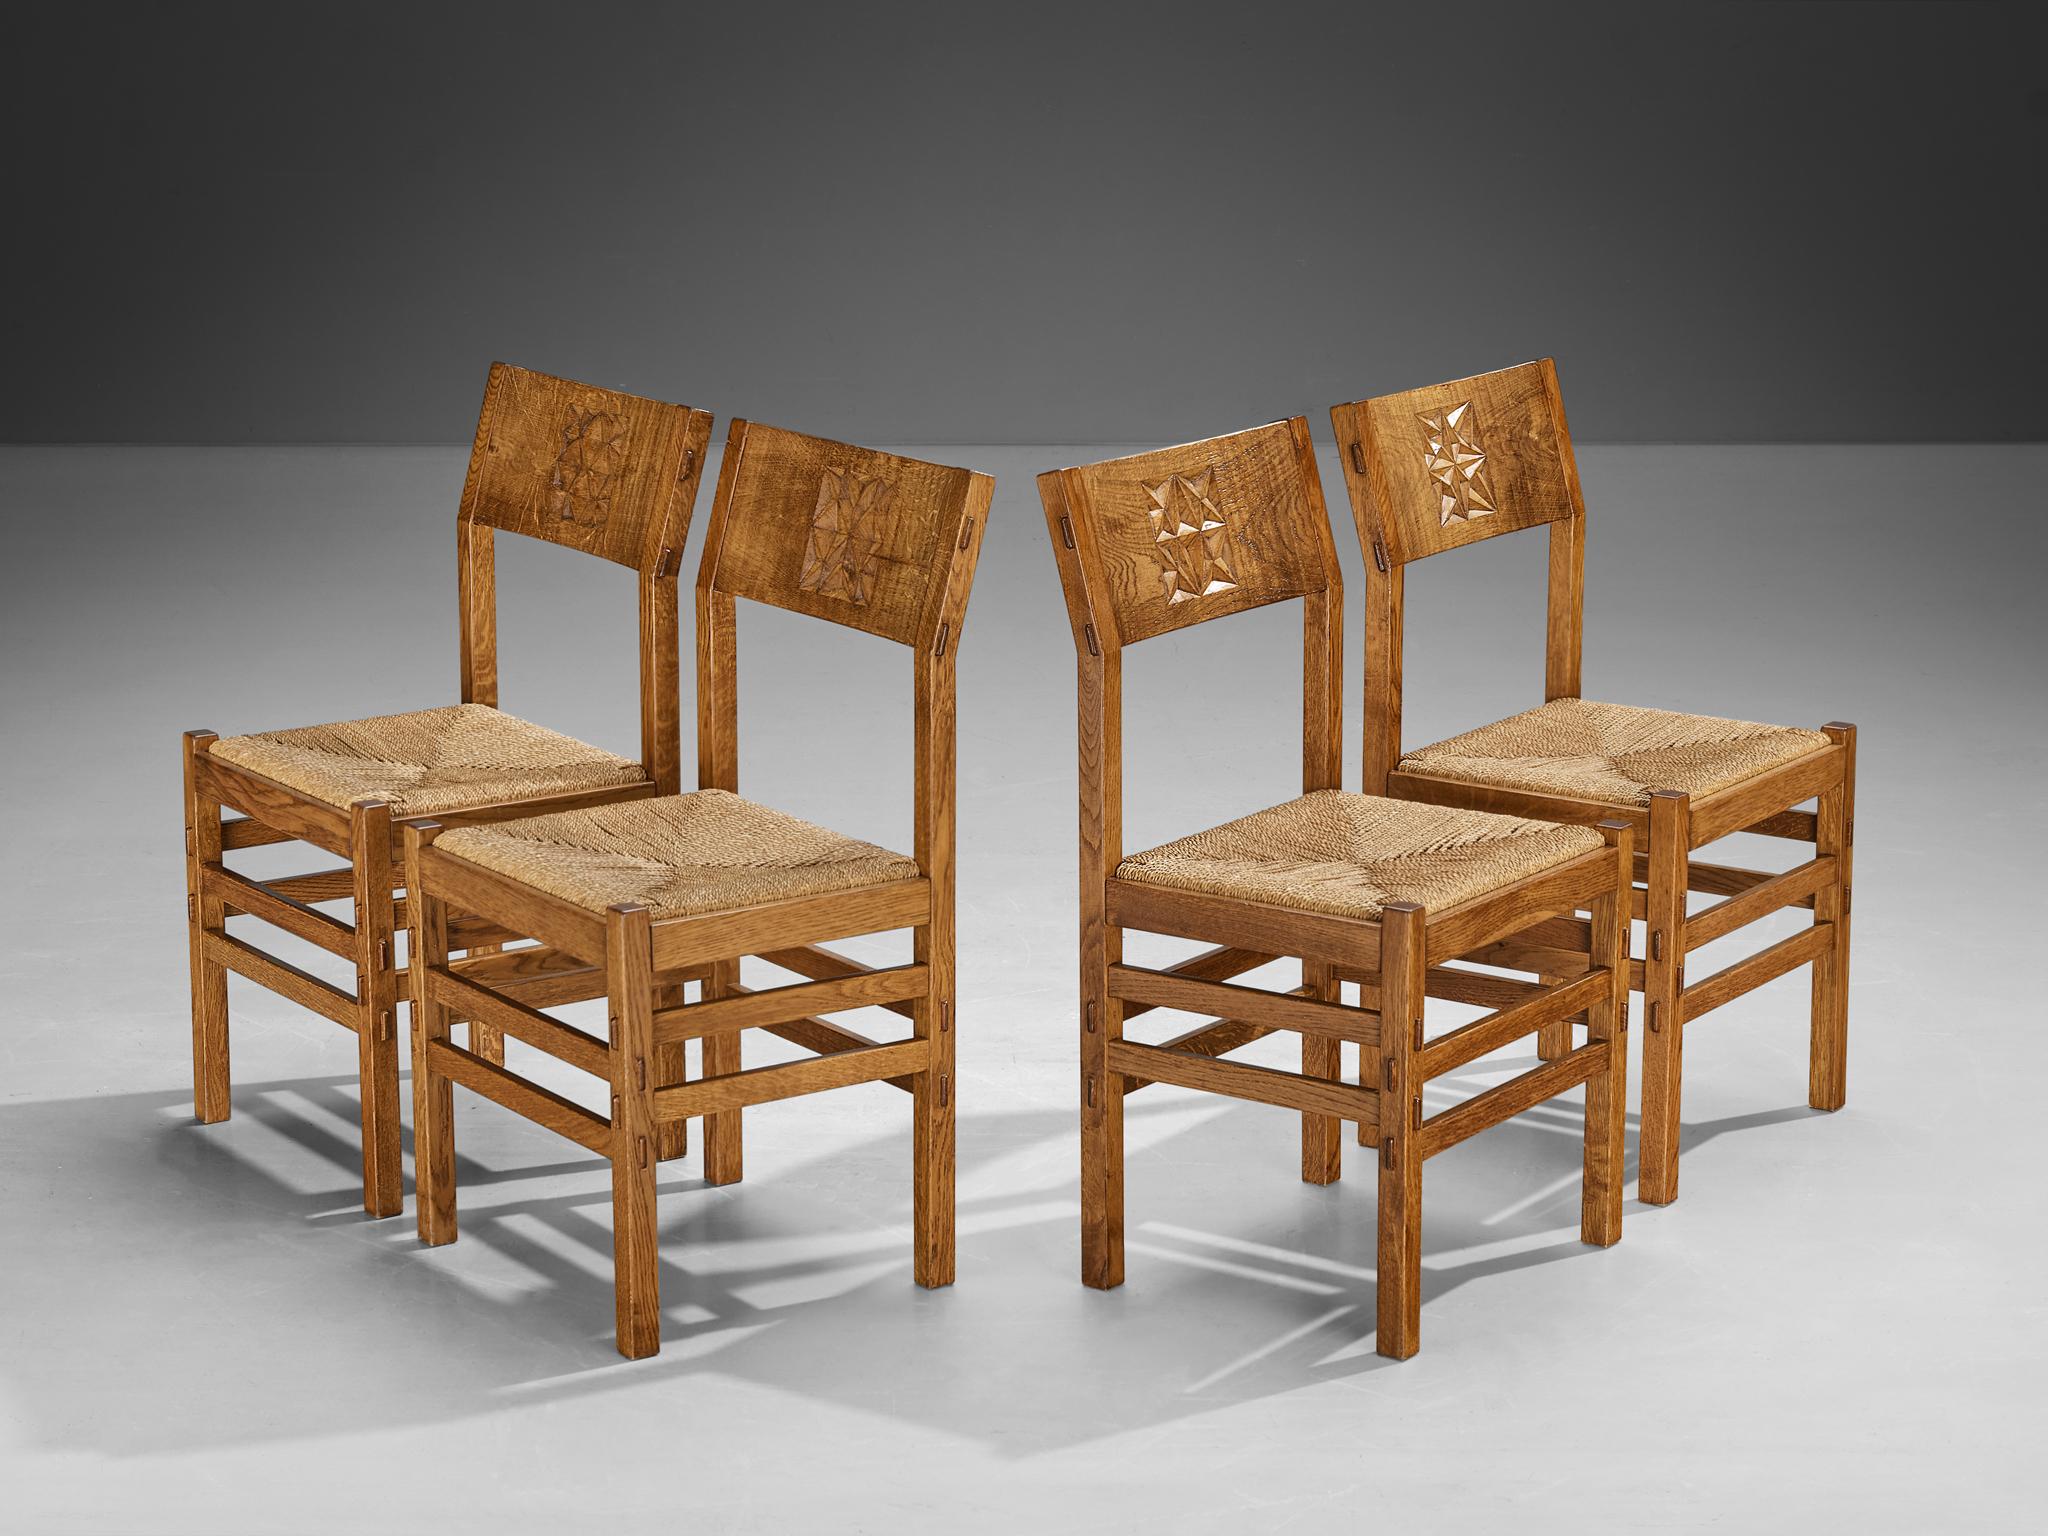 Giuseppe Rivadossi for Officina Rivadossi, set of four dining chairs, oak, straw, Italy, 1970s

An exceptional set of chairs by the Italian sculptor and designer Giuseppe Rivadossi. The chairs are architecturally built based on the assemblage of